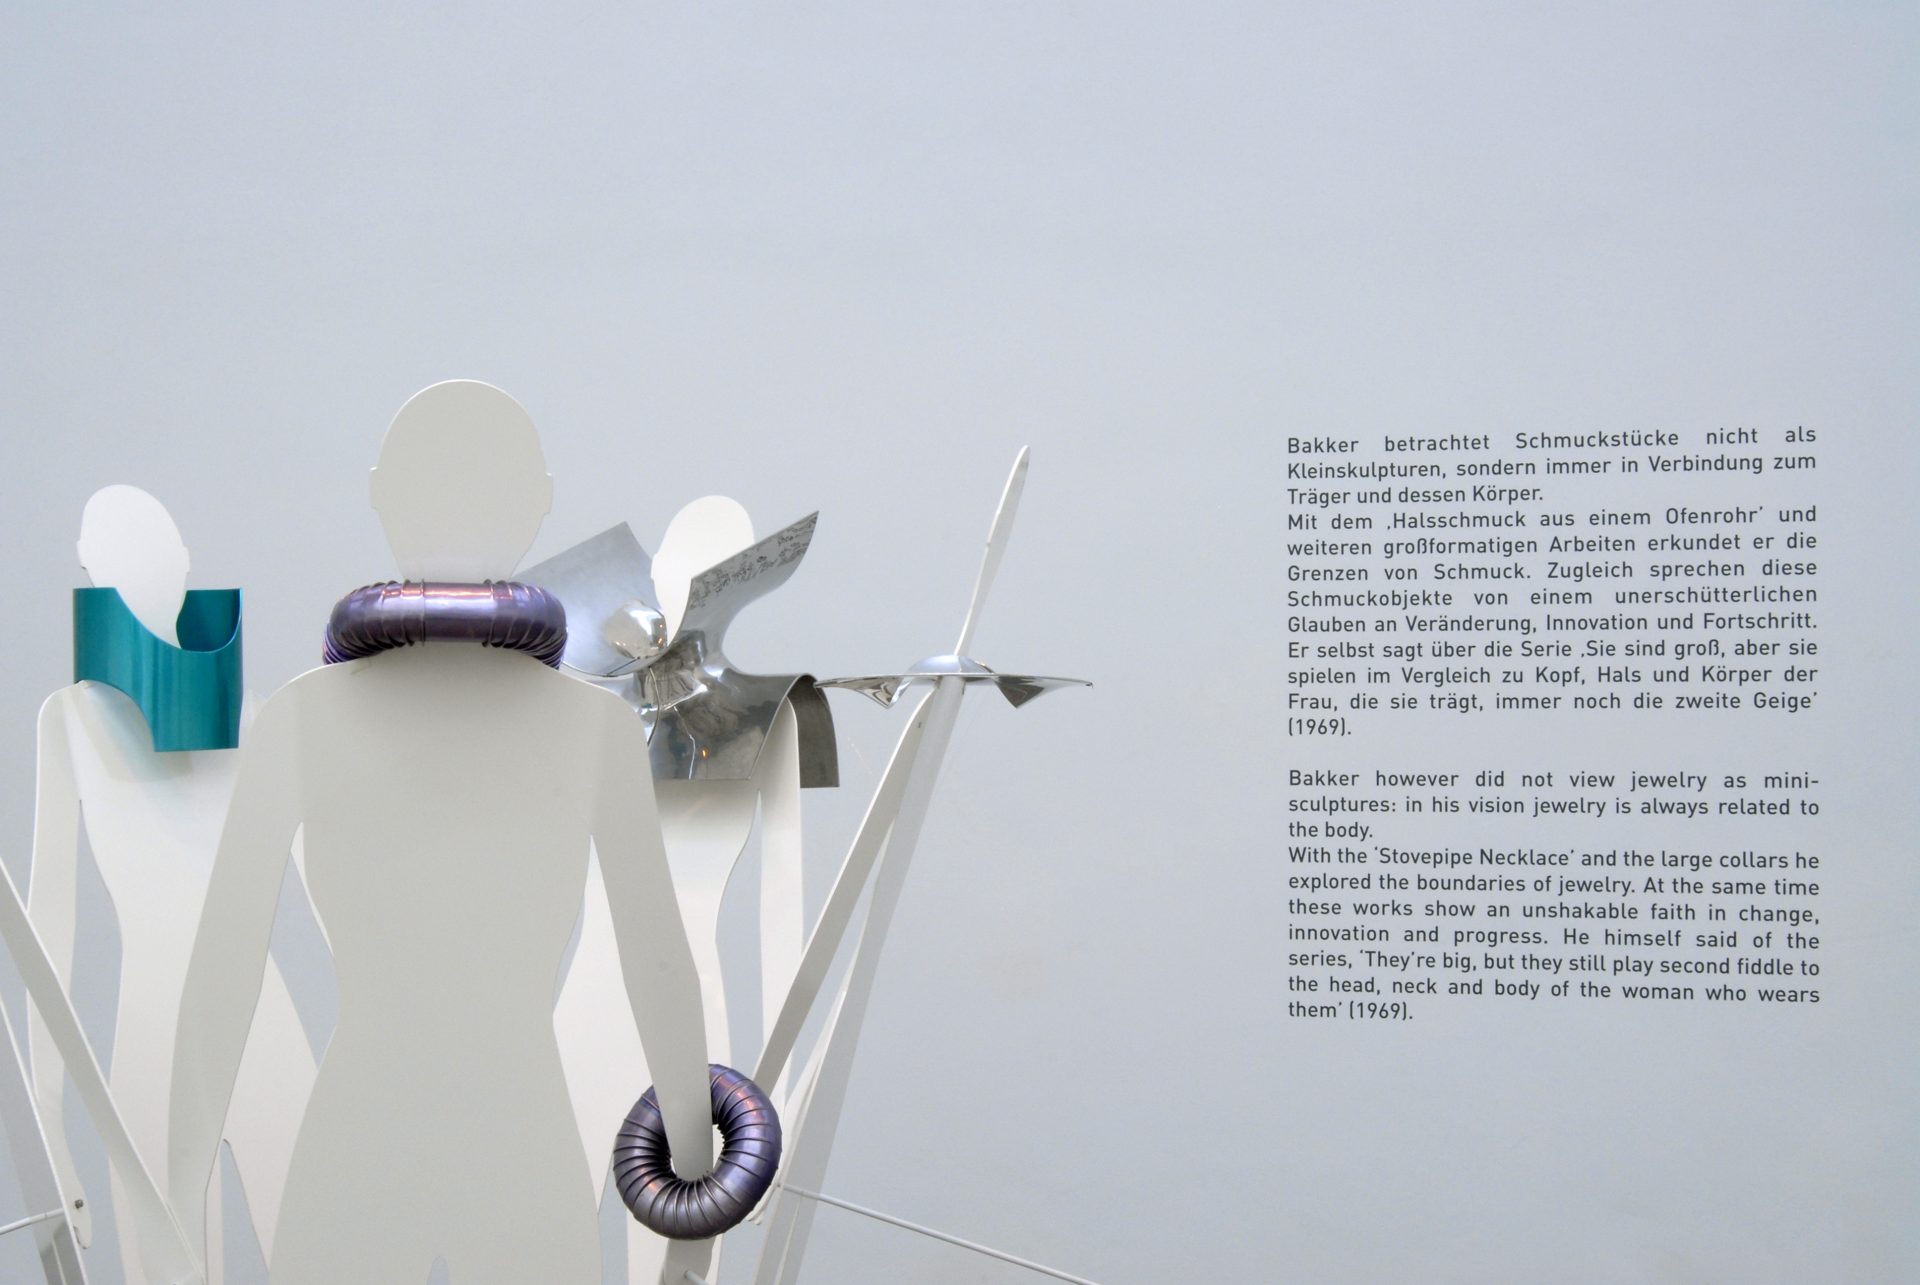 On the left are abstract metal figures wearing round decorative objects on their necks and arms. To the right is an informative wall text.